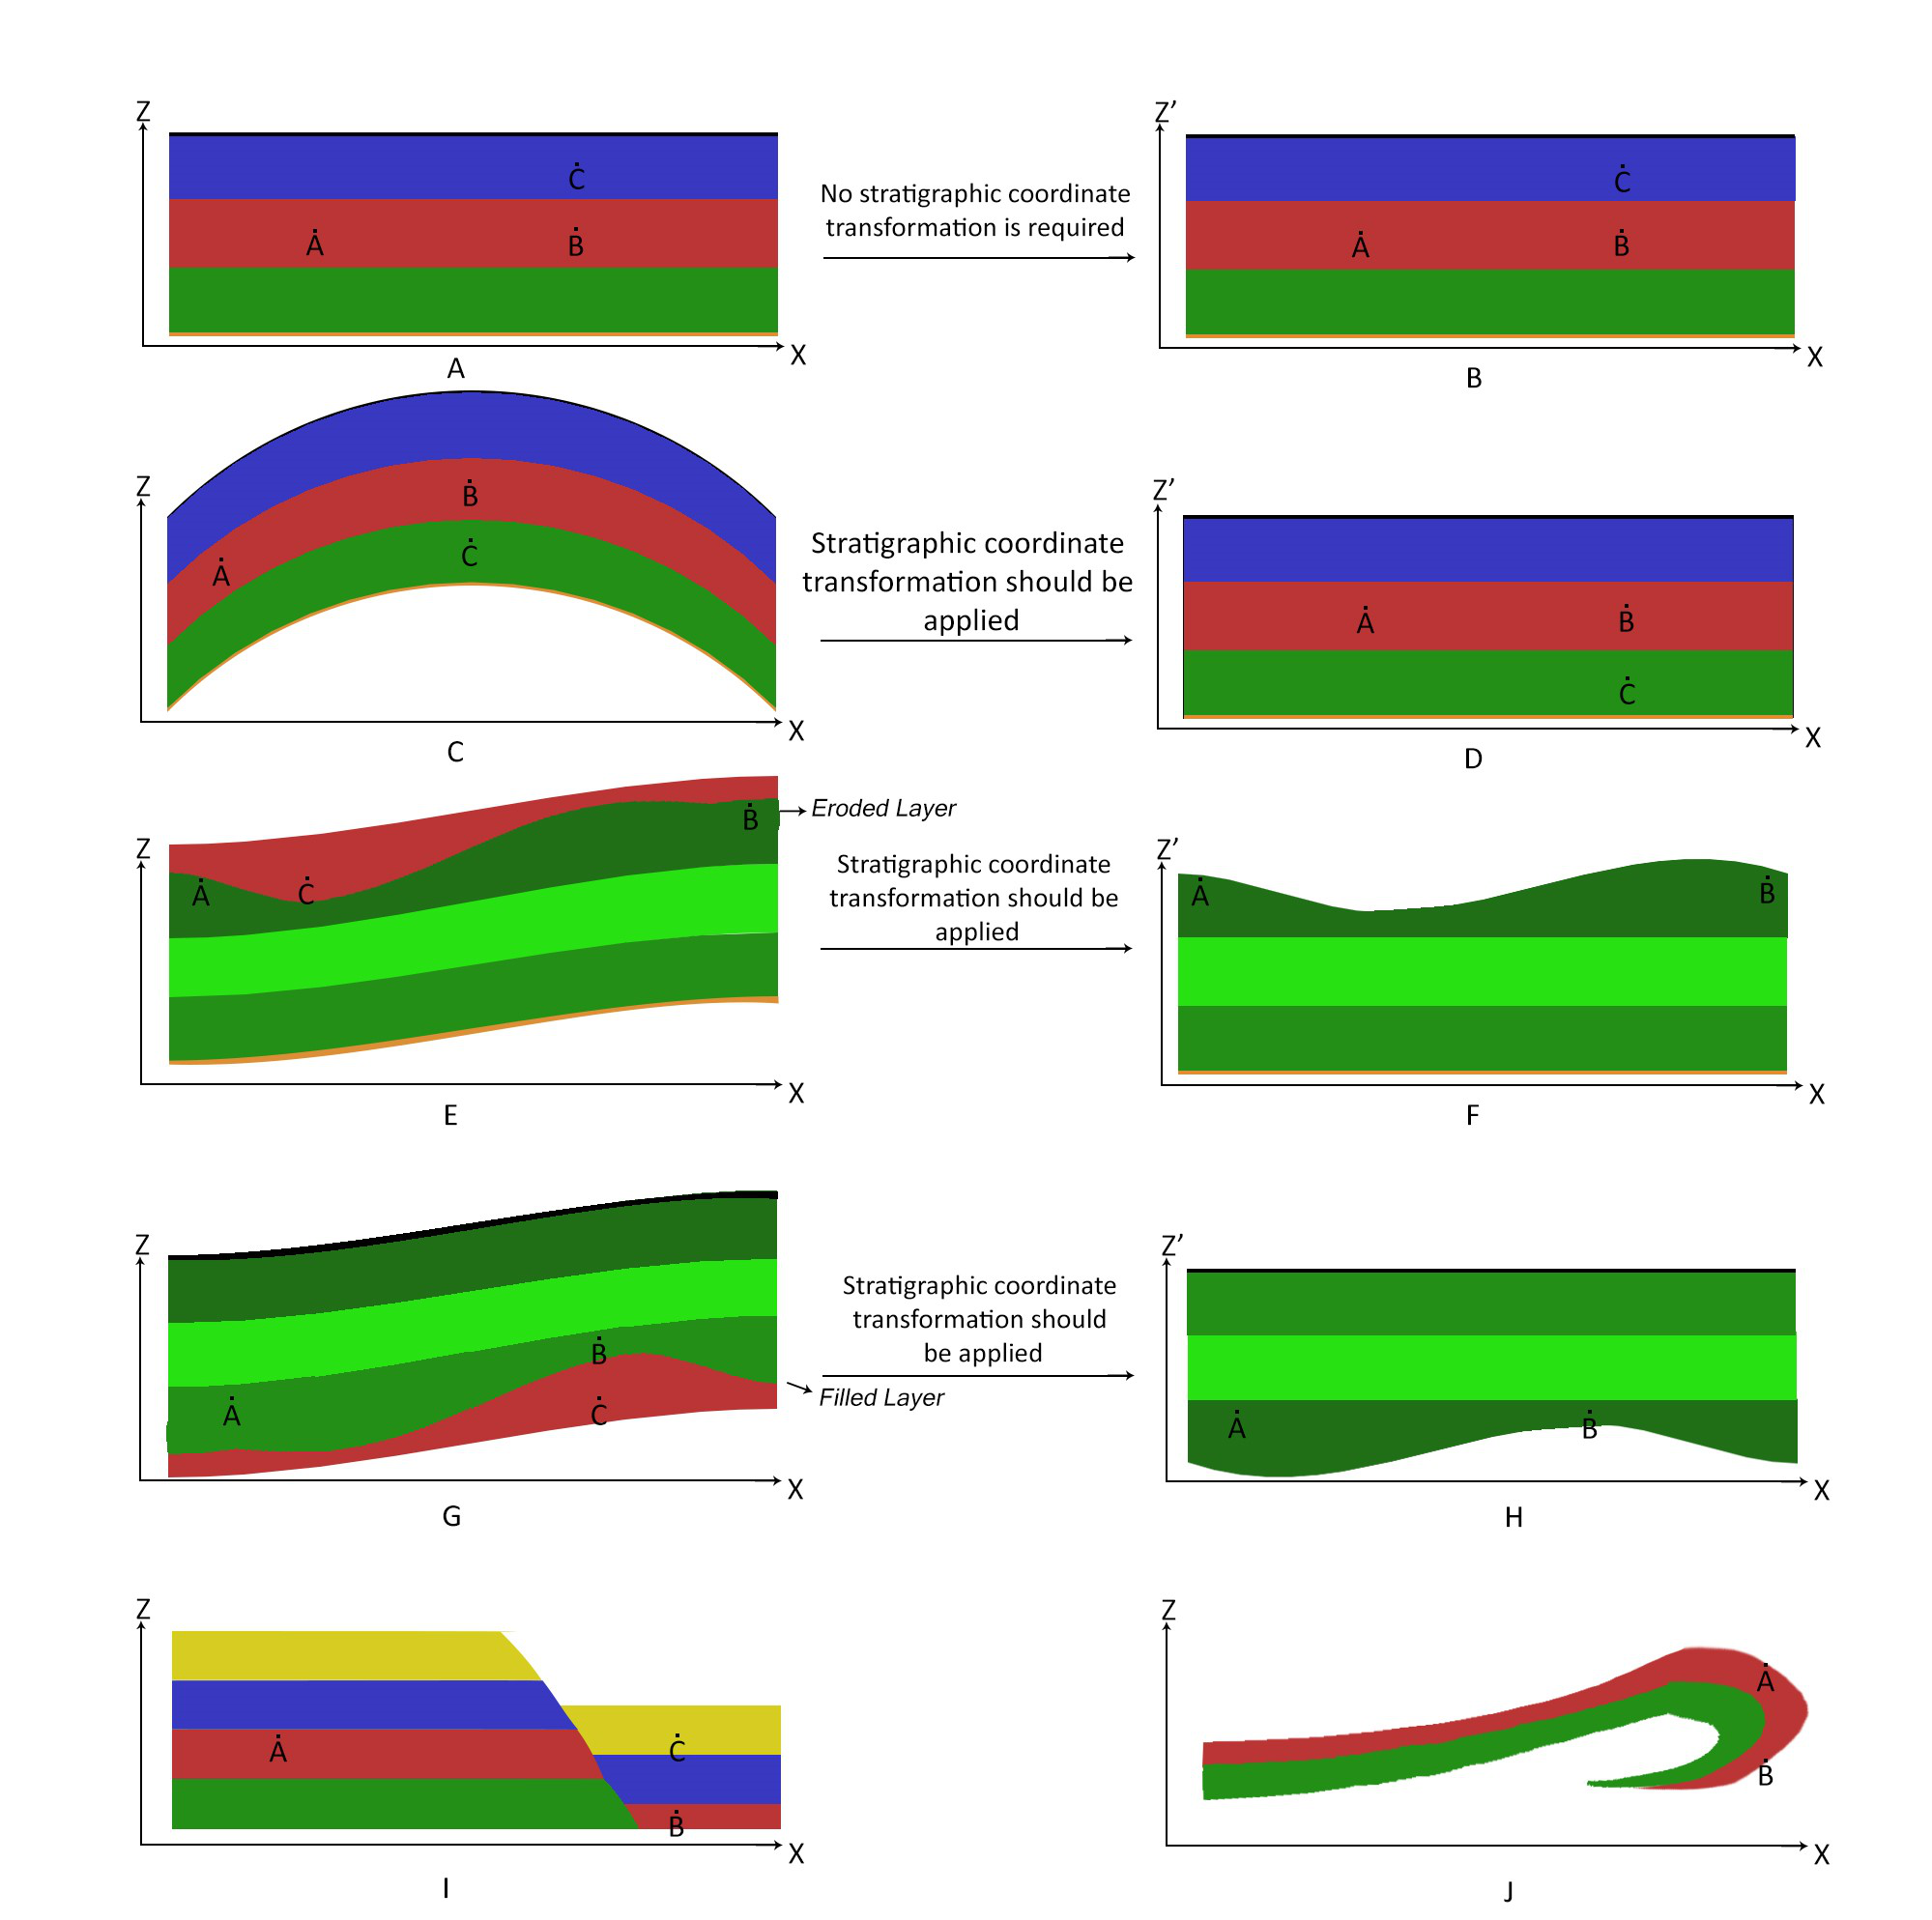 Examples A to H: Six conceptual stratigraphic formations and scenarios where transformation is appropriate. Examples I to J: Two stratigraphic formations where stratigraphic transformations are not appropriate. The red and black solid lines represent the bounding surfaces that have remained in place since the time of deposition.